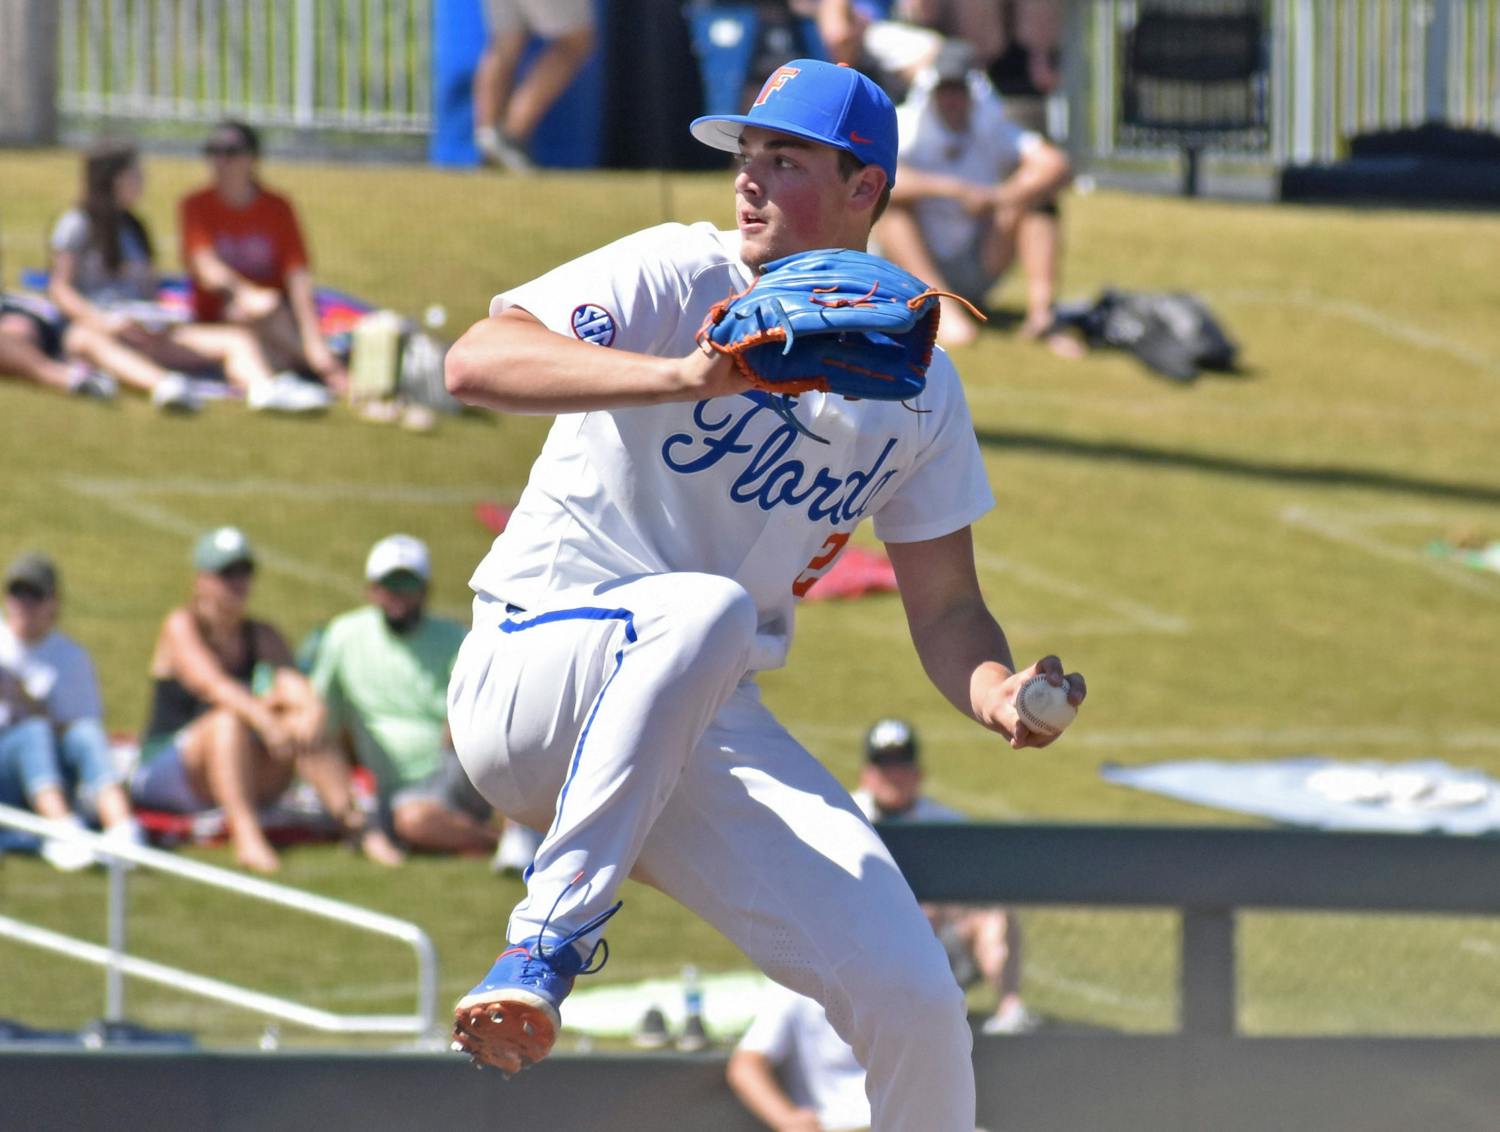  The Gators travel to Columbia, South Carolina, Friday to take on No. 20 South Carolina in their first away SEC series. Photo from UF-Jacksonville game March 14.